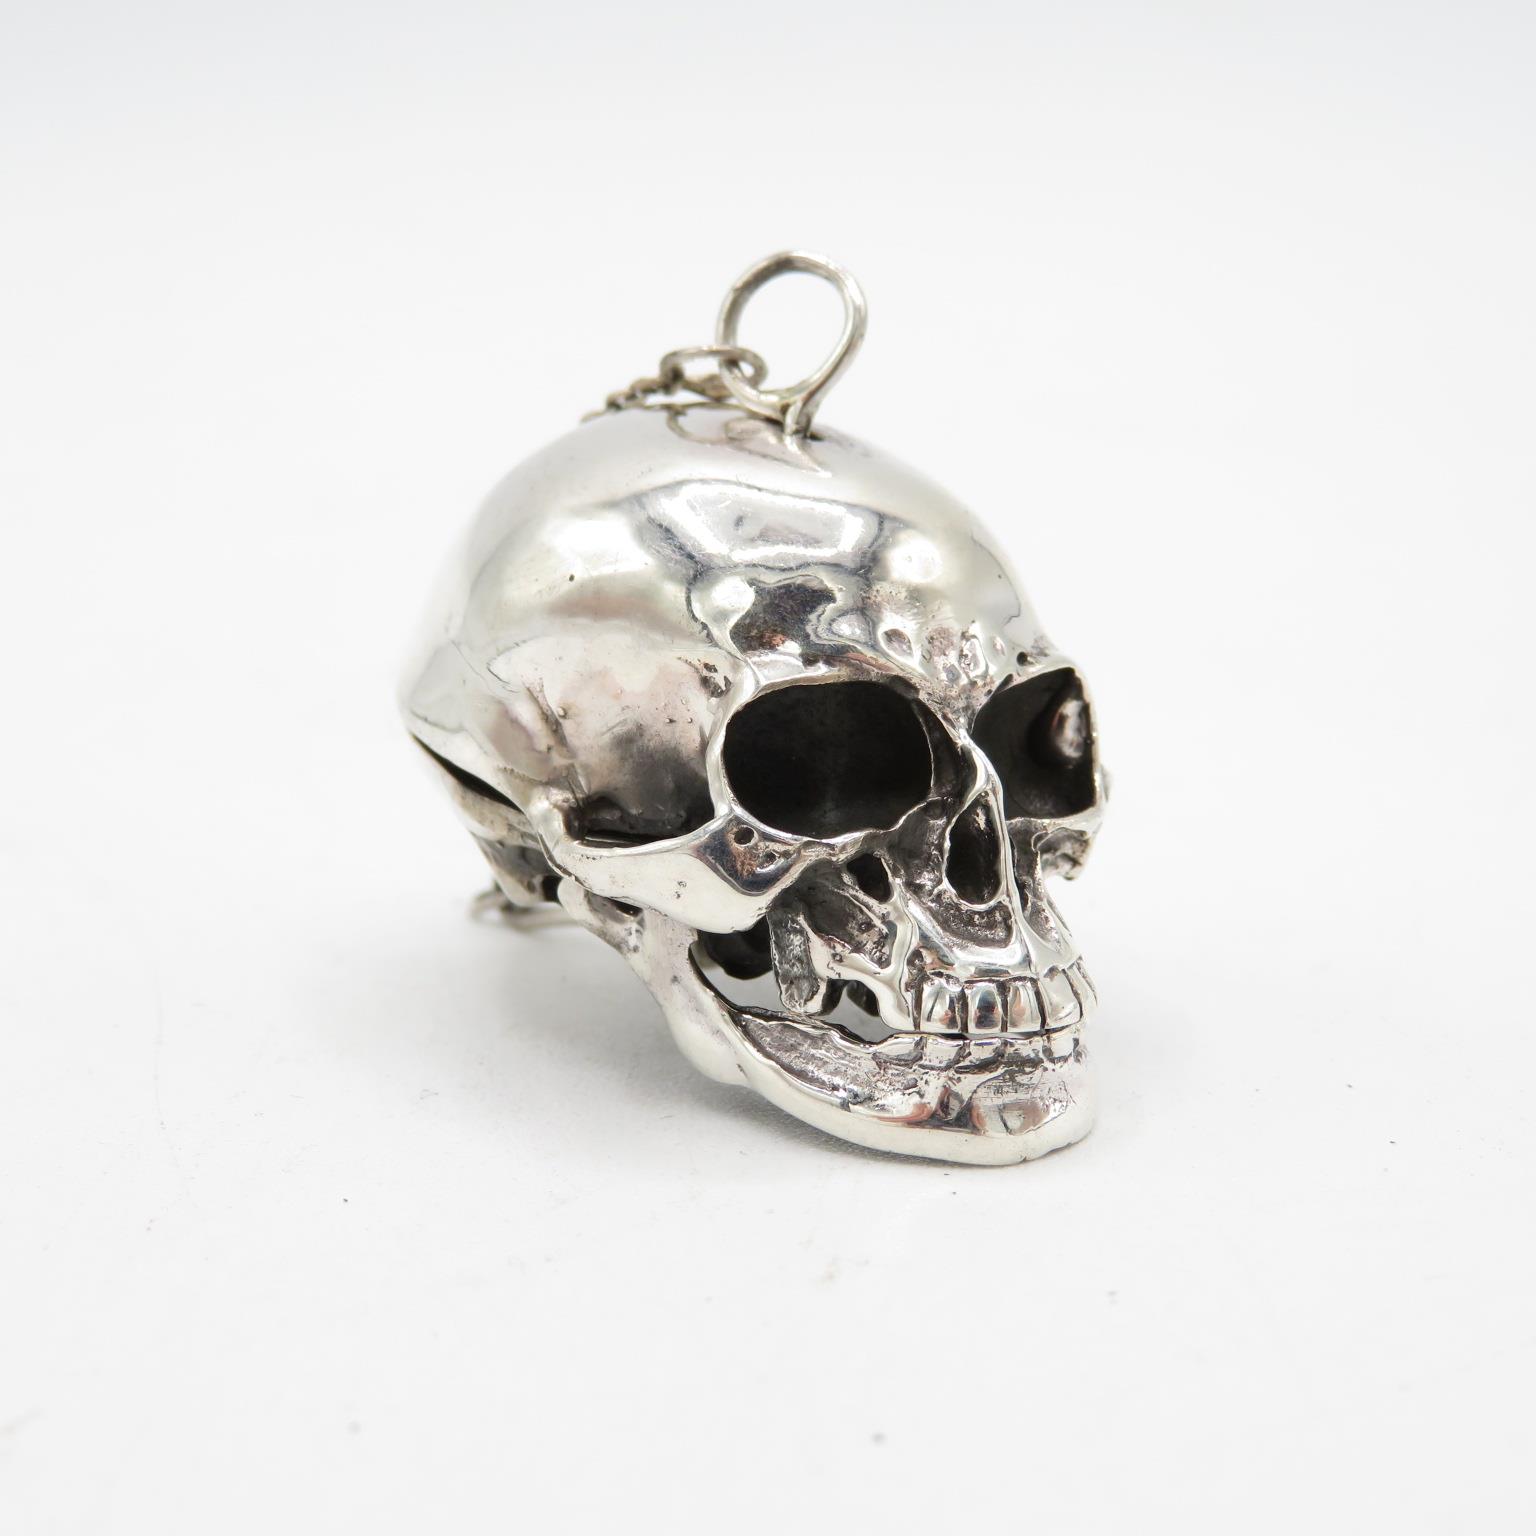 Extremely fine detailed articulated Memento Mori human skull in sterling silver with hinged bottom - Image 3 of 6